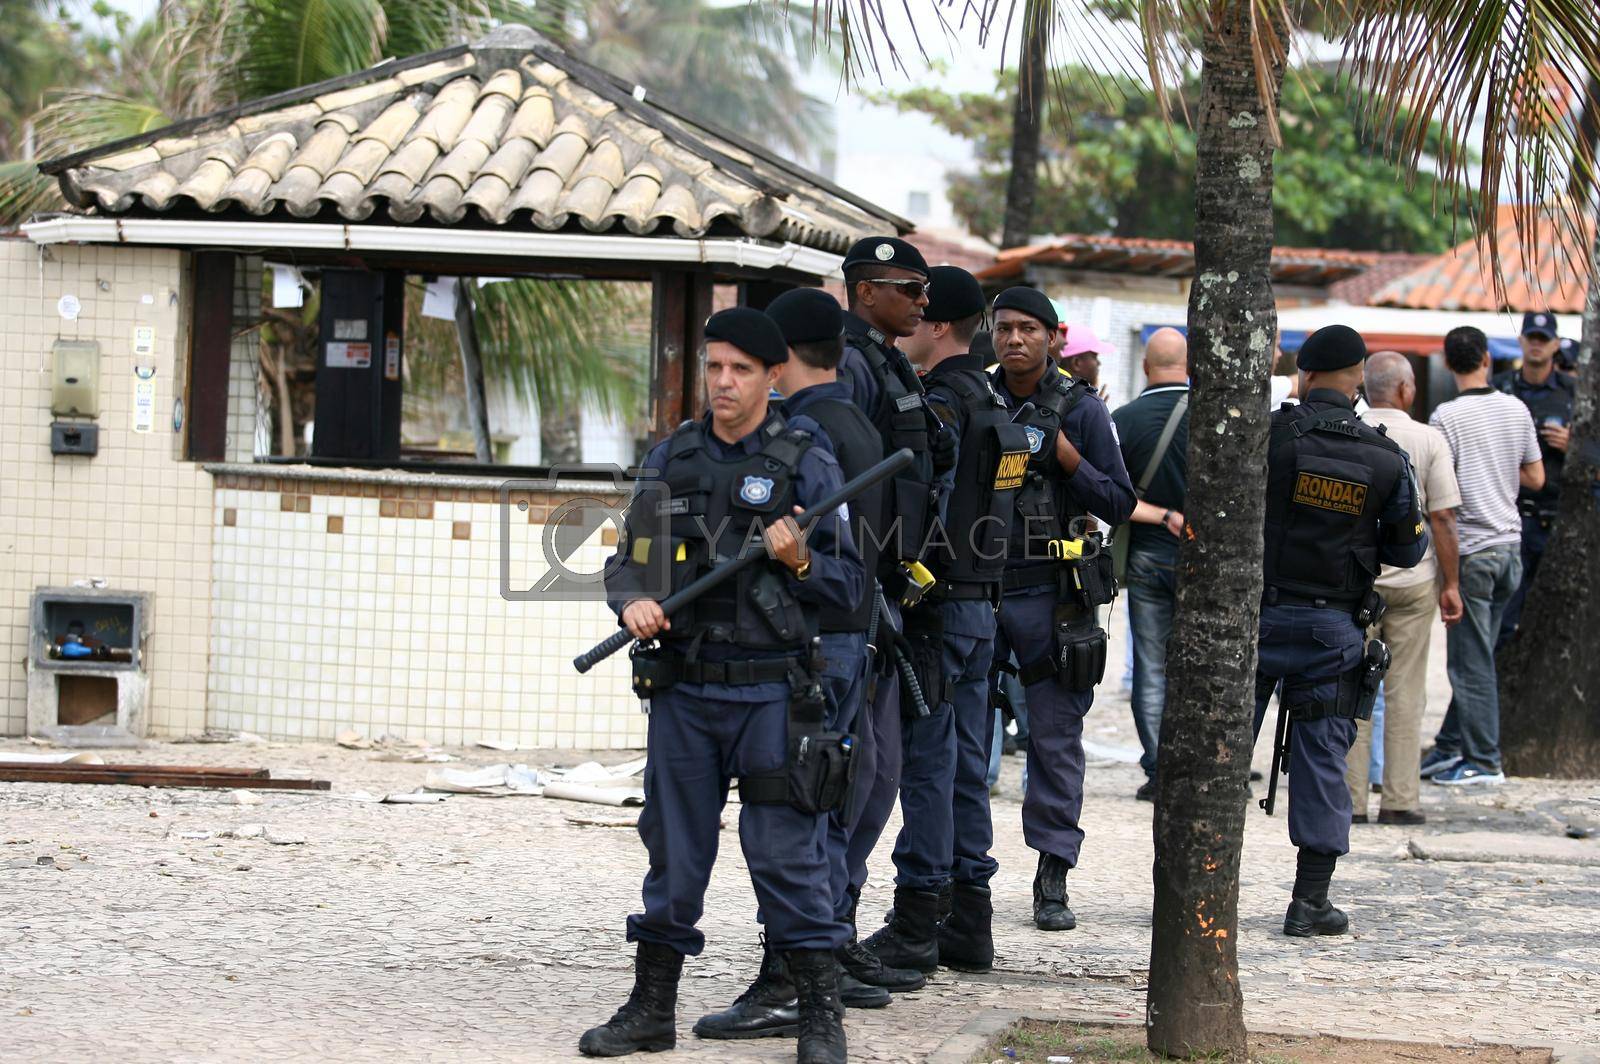 salvador, bahia, brazil - july 15, 2014: agents of the Municipal Guard do security during road restoration works in the neighborhood of Itapua in the city of Salvador.
